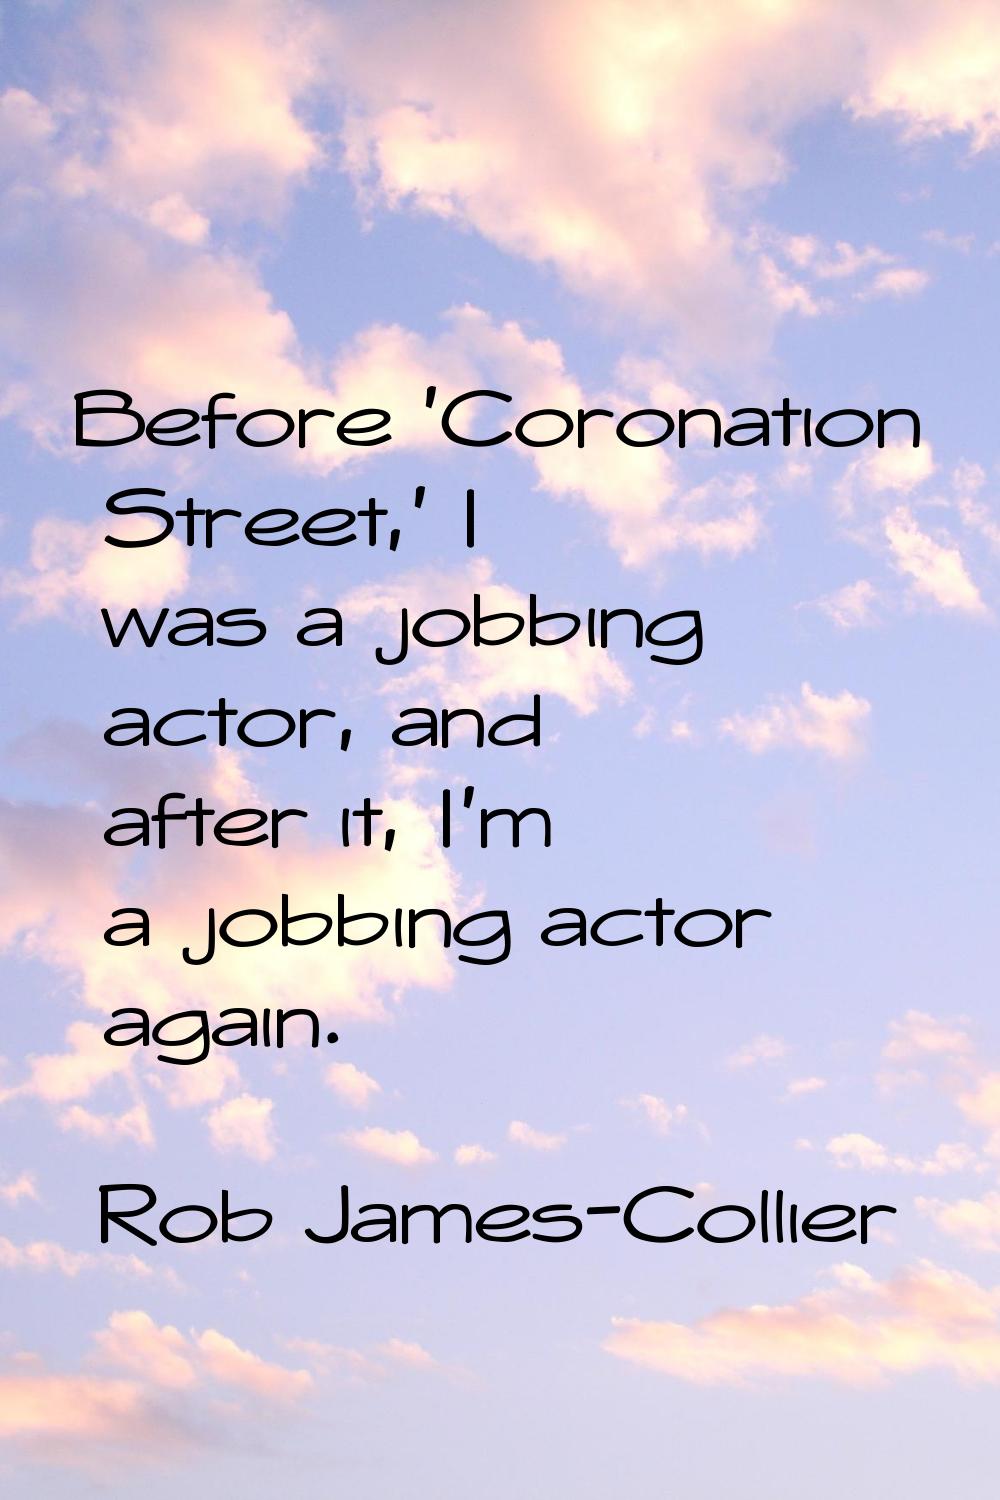 Before 'Coronation Street,' I was a jobbing actor, and after it, I'm a jobbing actor again.